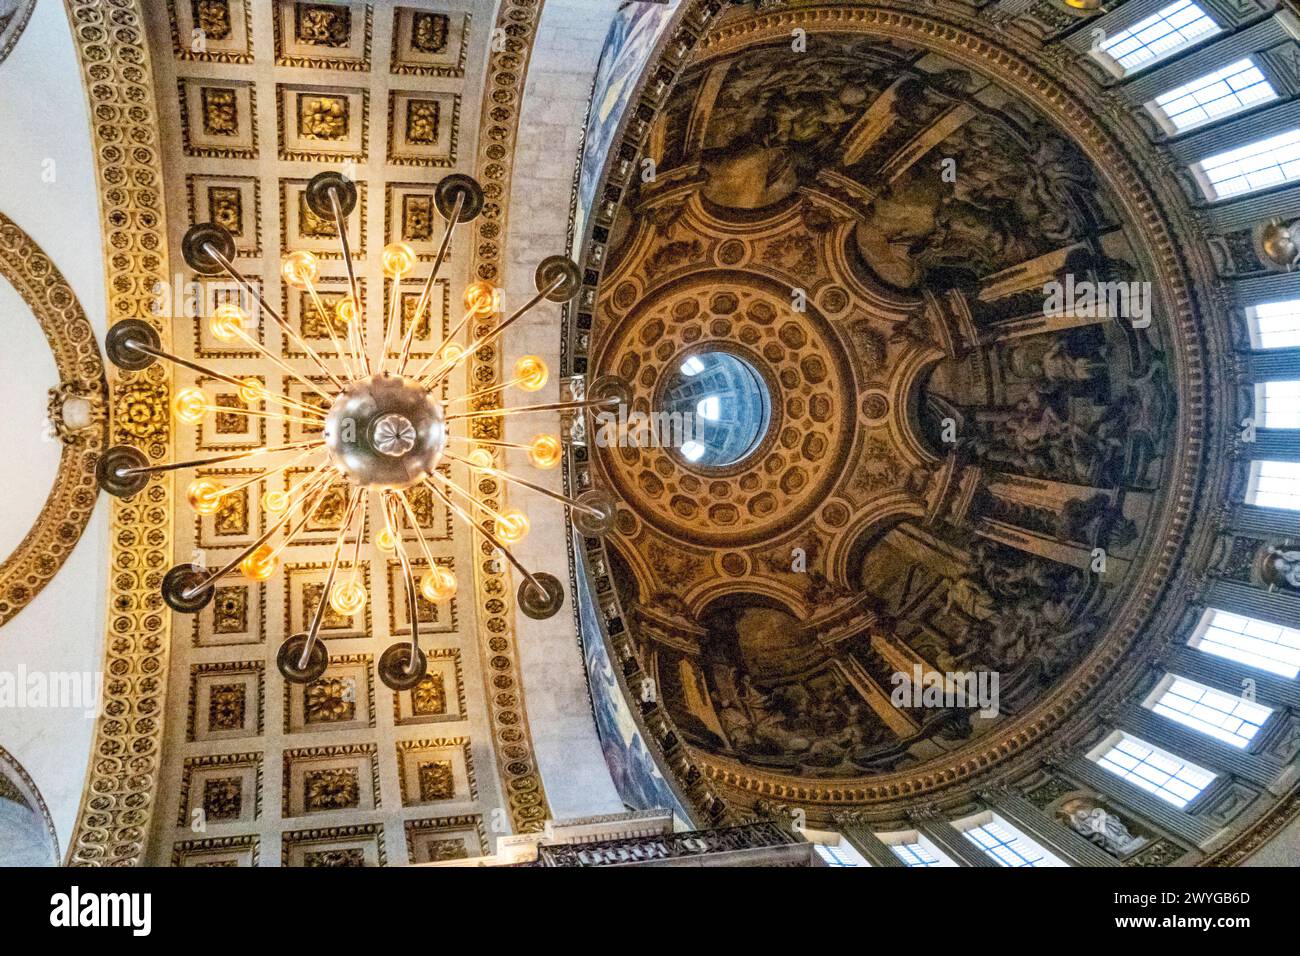 Interior of dome of St Paul's Cathedral, London, England, UK Stock Photo